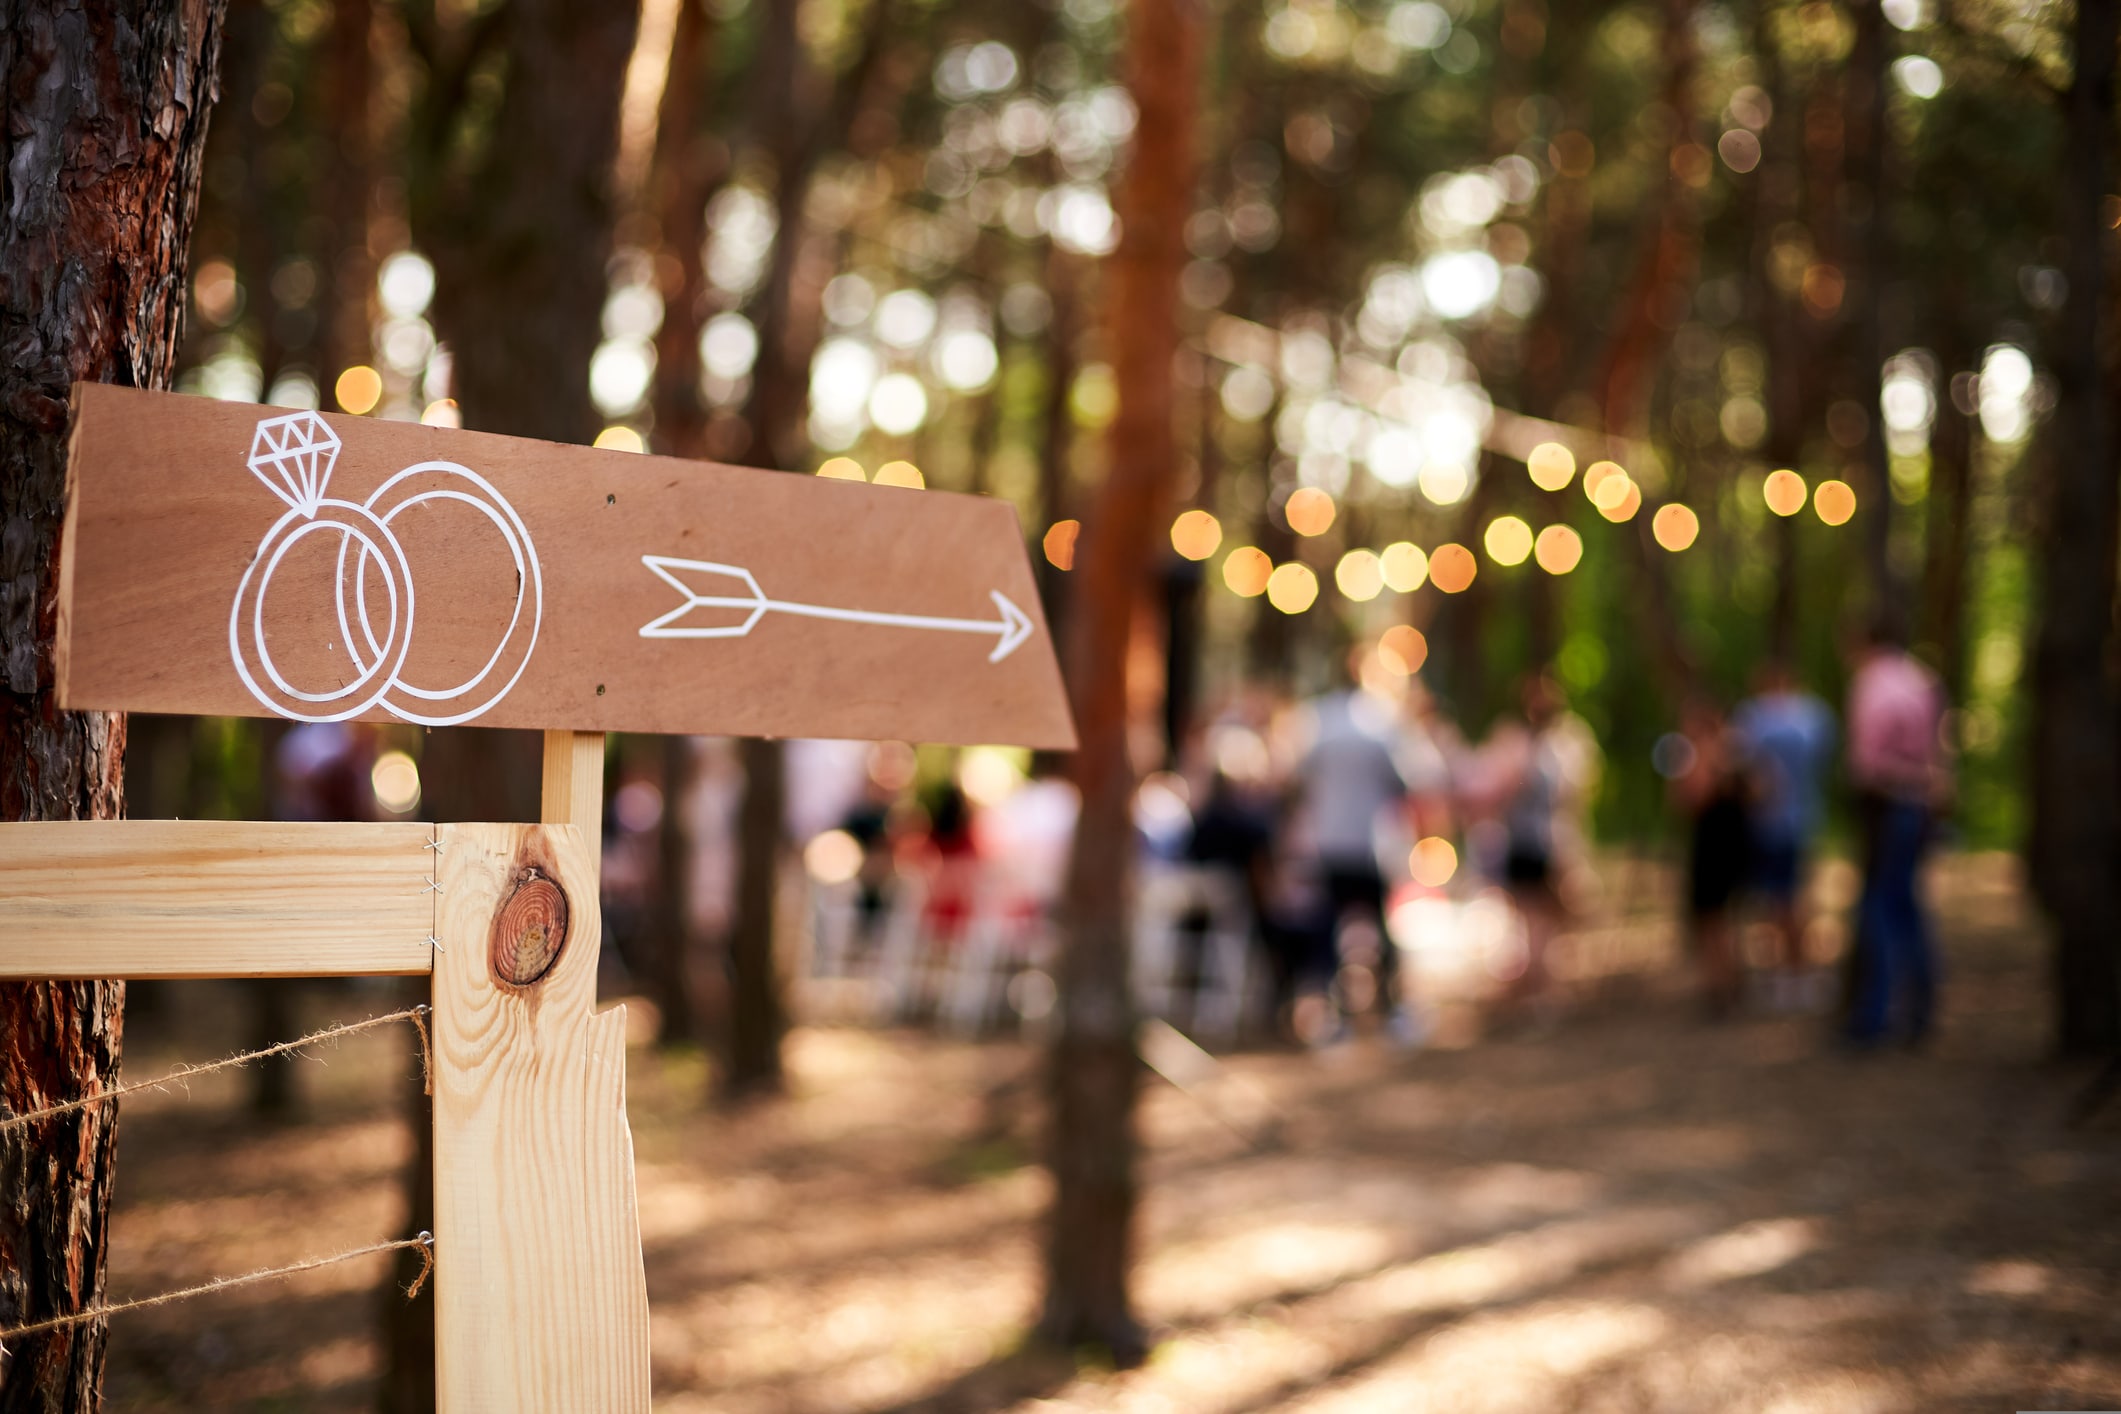 wedding ideas on a budget. Wooden arrow sign with wedding rings on ceremony venue. Wedding party banner post . Direction info banner for guests in pine forest outdoors. Rustic, country style decor.